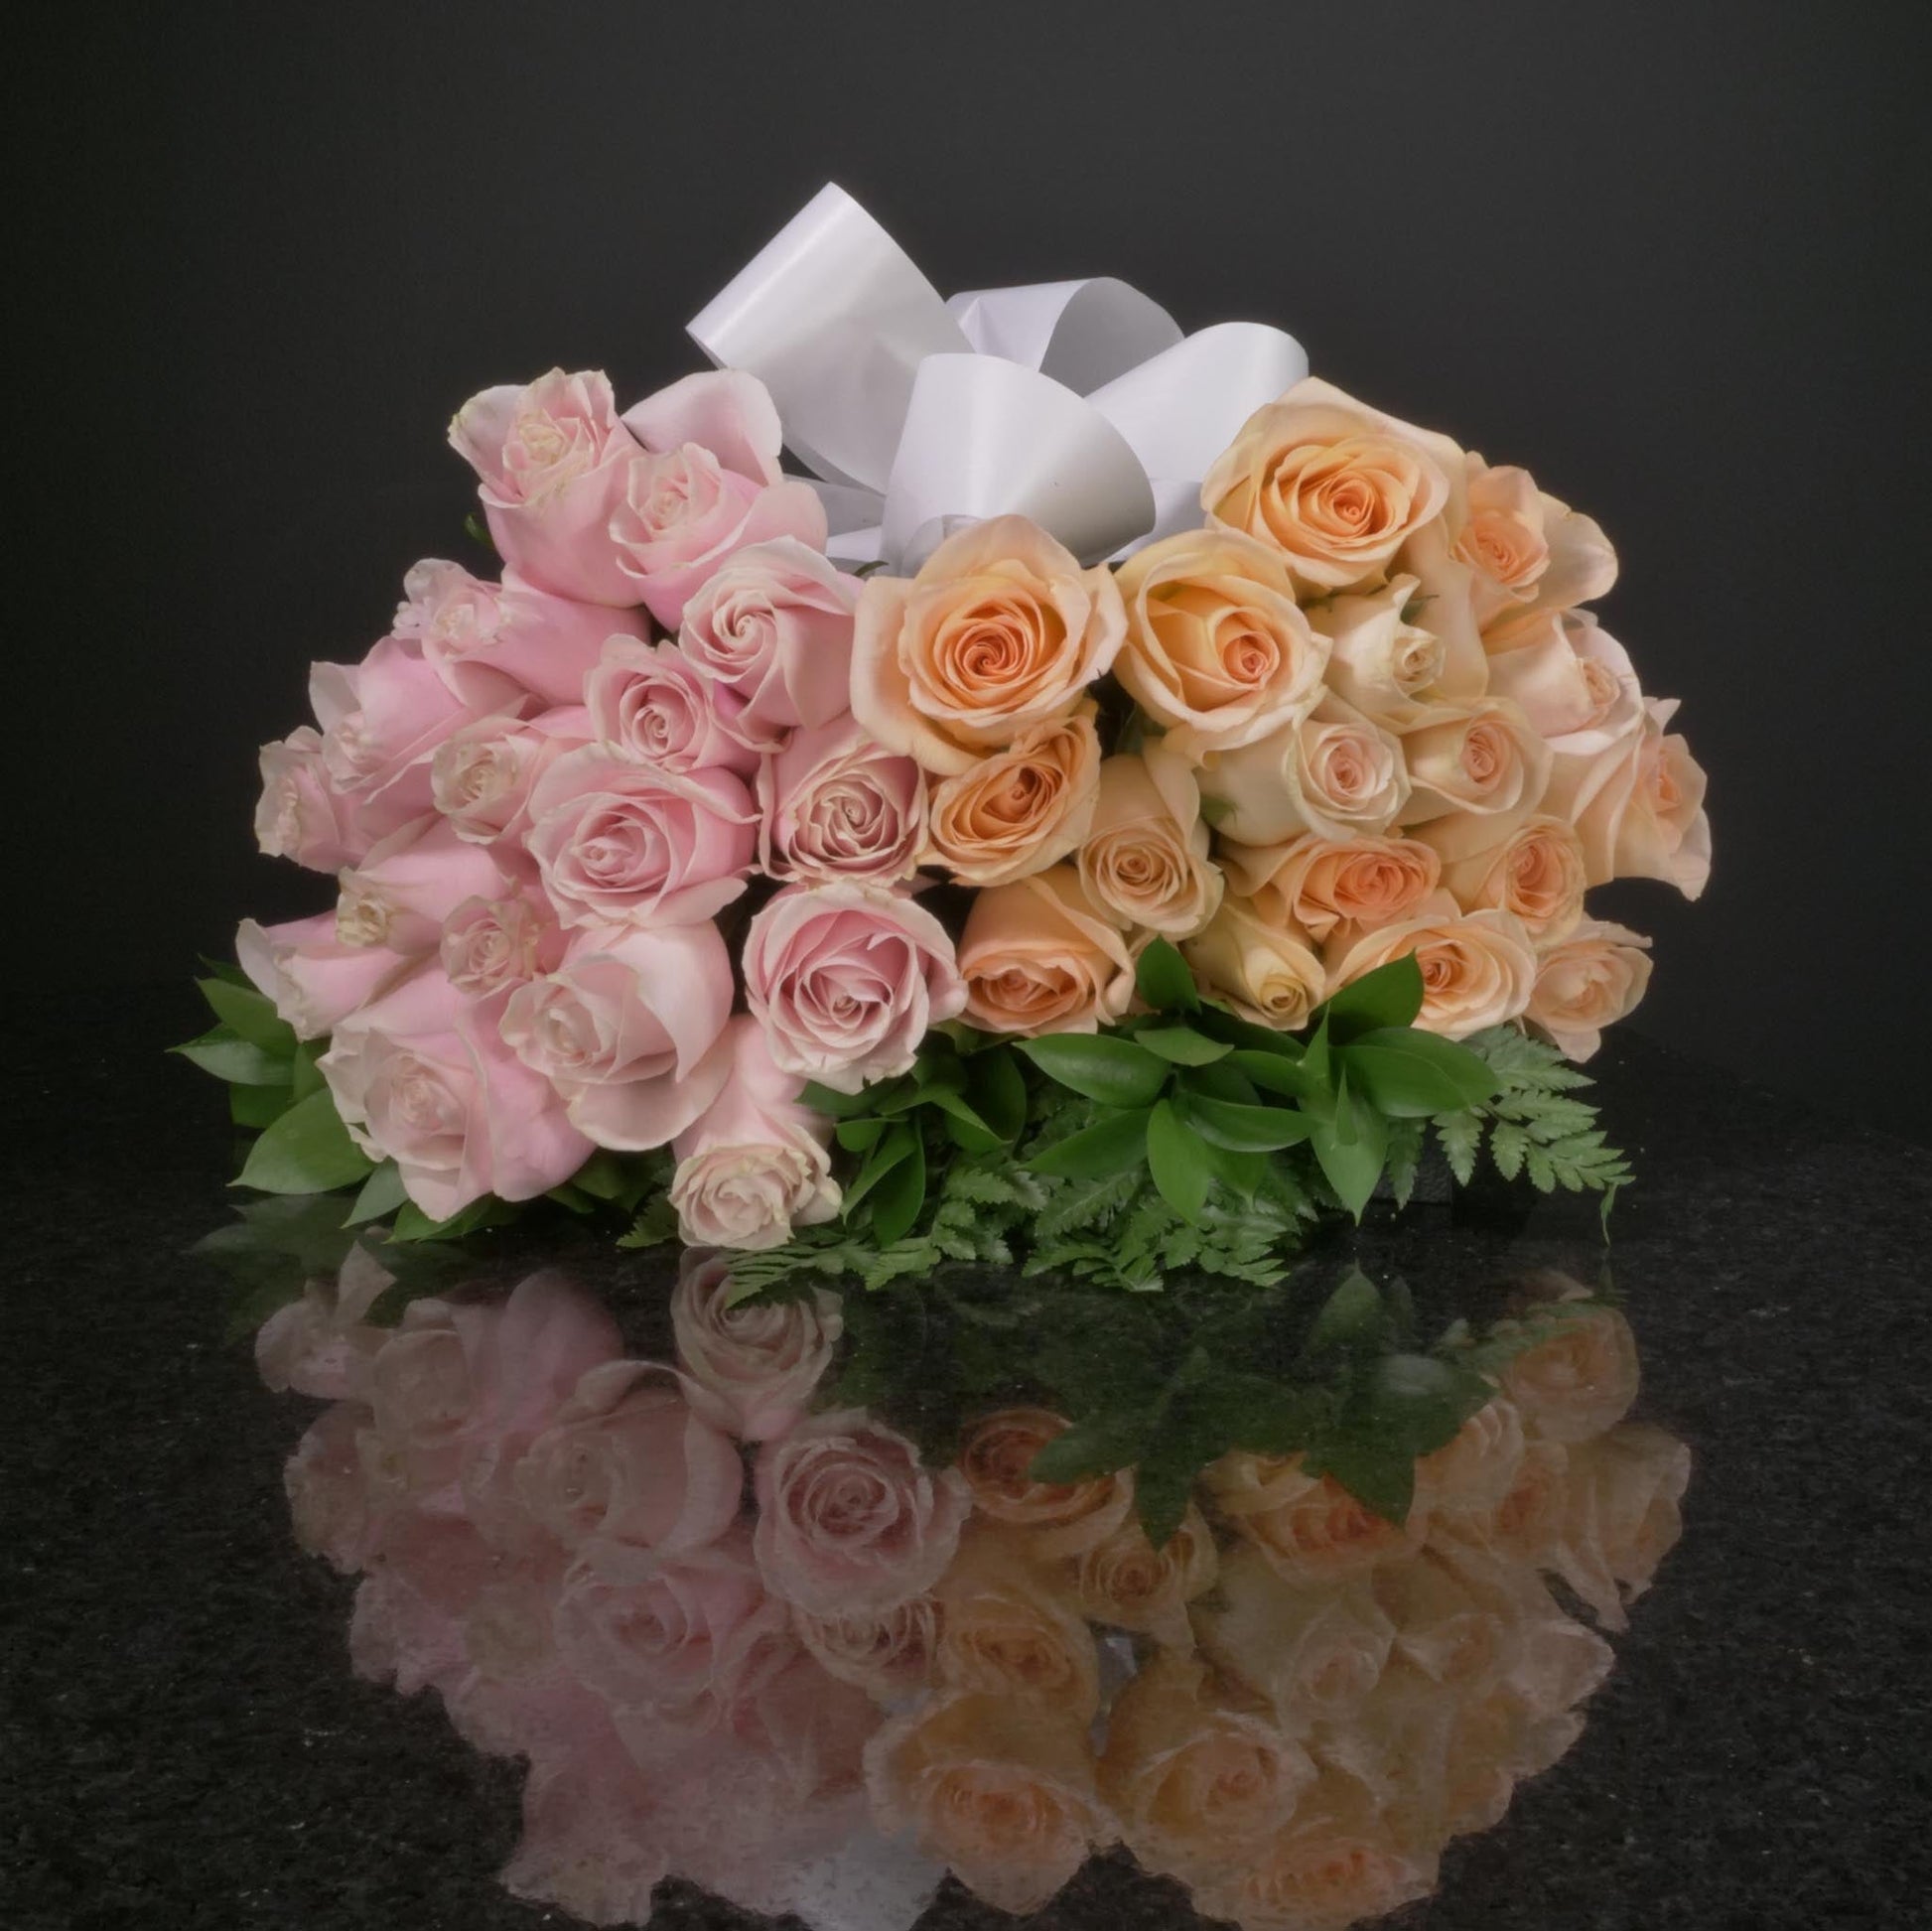  36 Roses / Hand-Tied / Basic